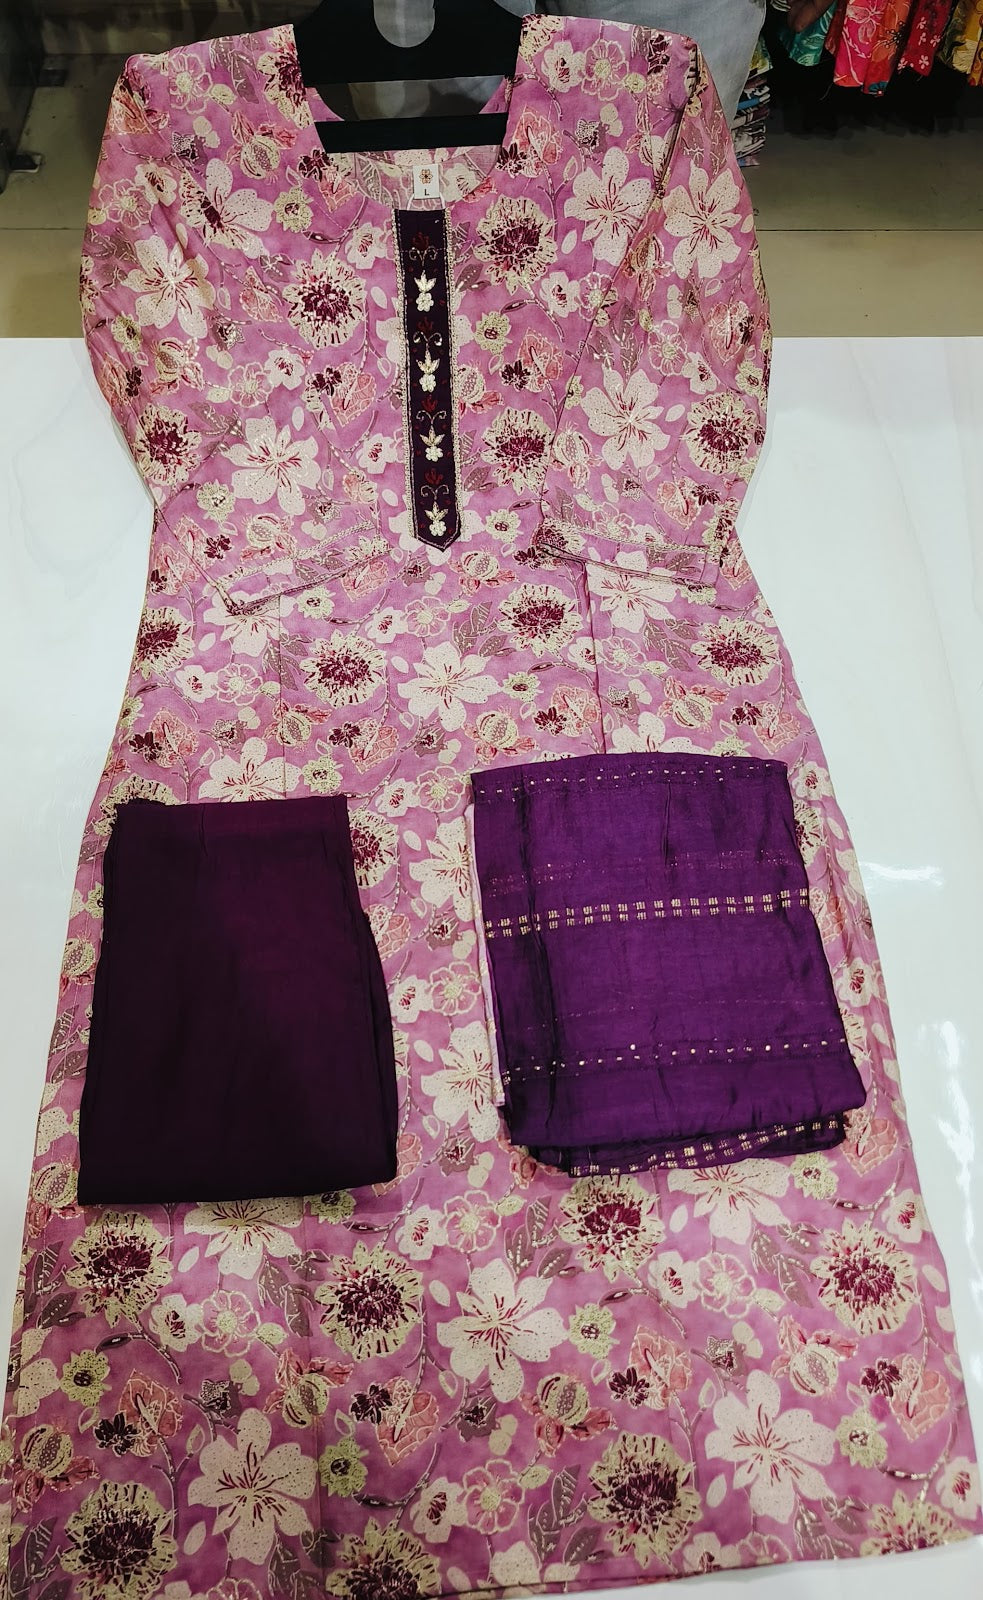 Nora Series Dveeja Fashion Modal Chanderi Readymade Pant Style Suits Manufacturer Ahmedabad